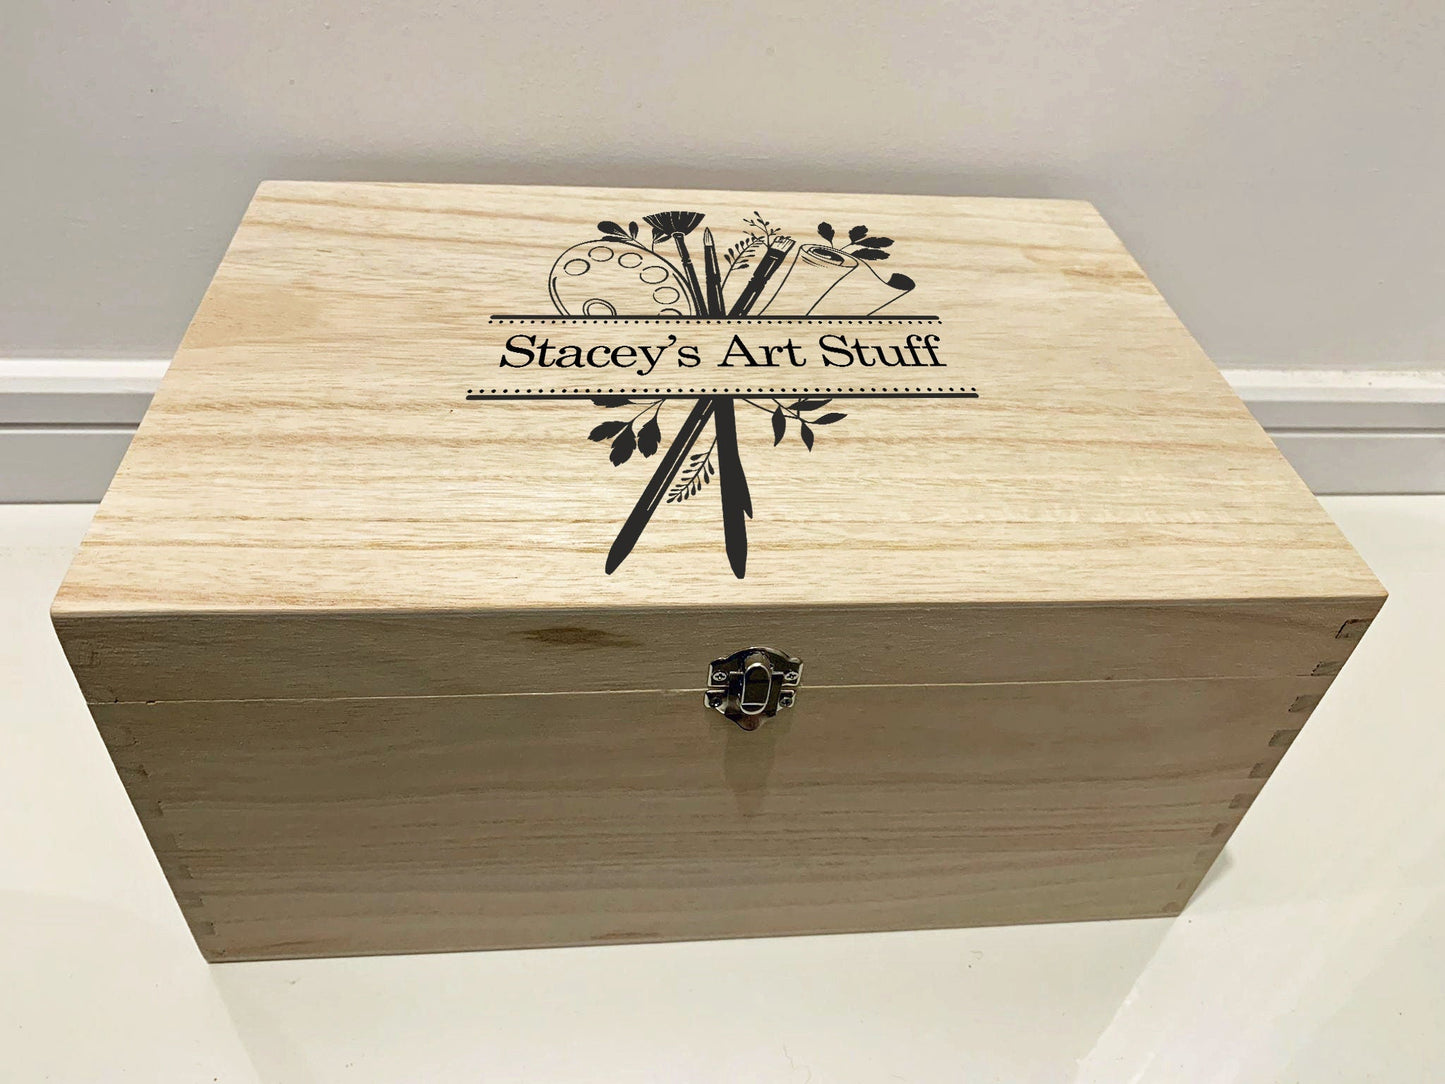 Large Personalised Engraved Wooden Art Box with Paintbrush and Palette design - Resplendent Aurora